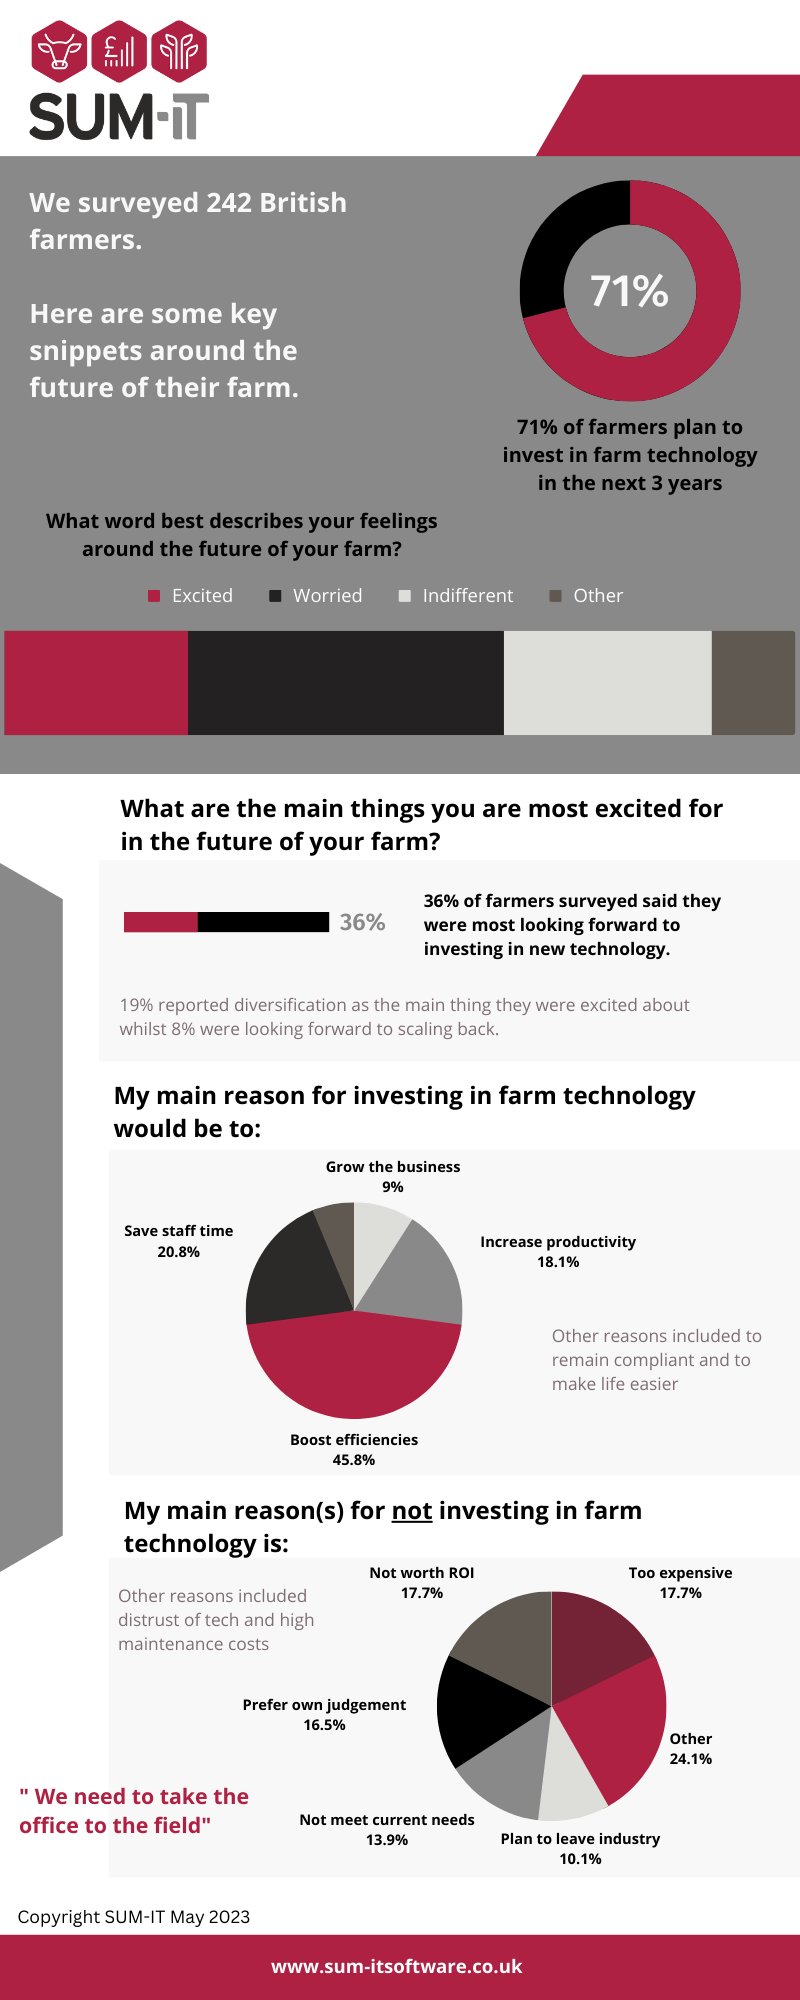 Infographic displaying key findings around farmers